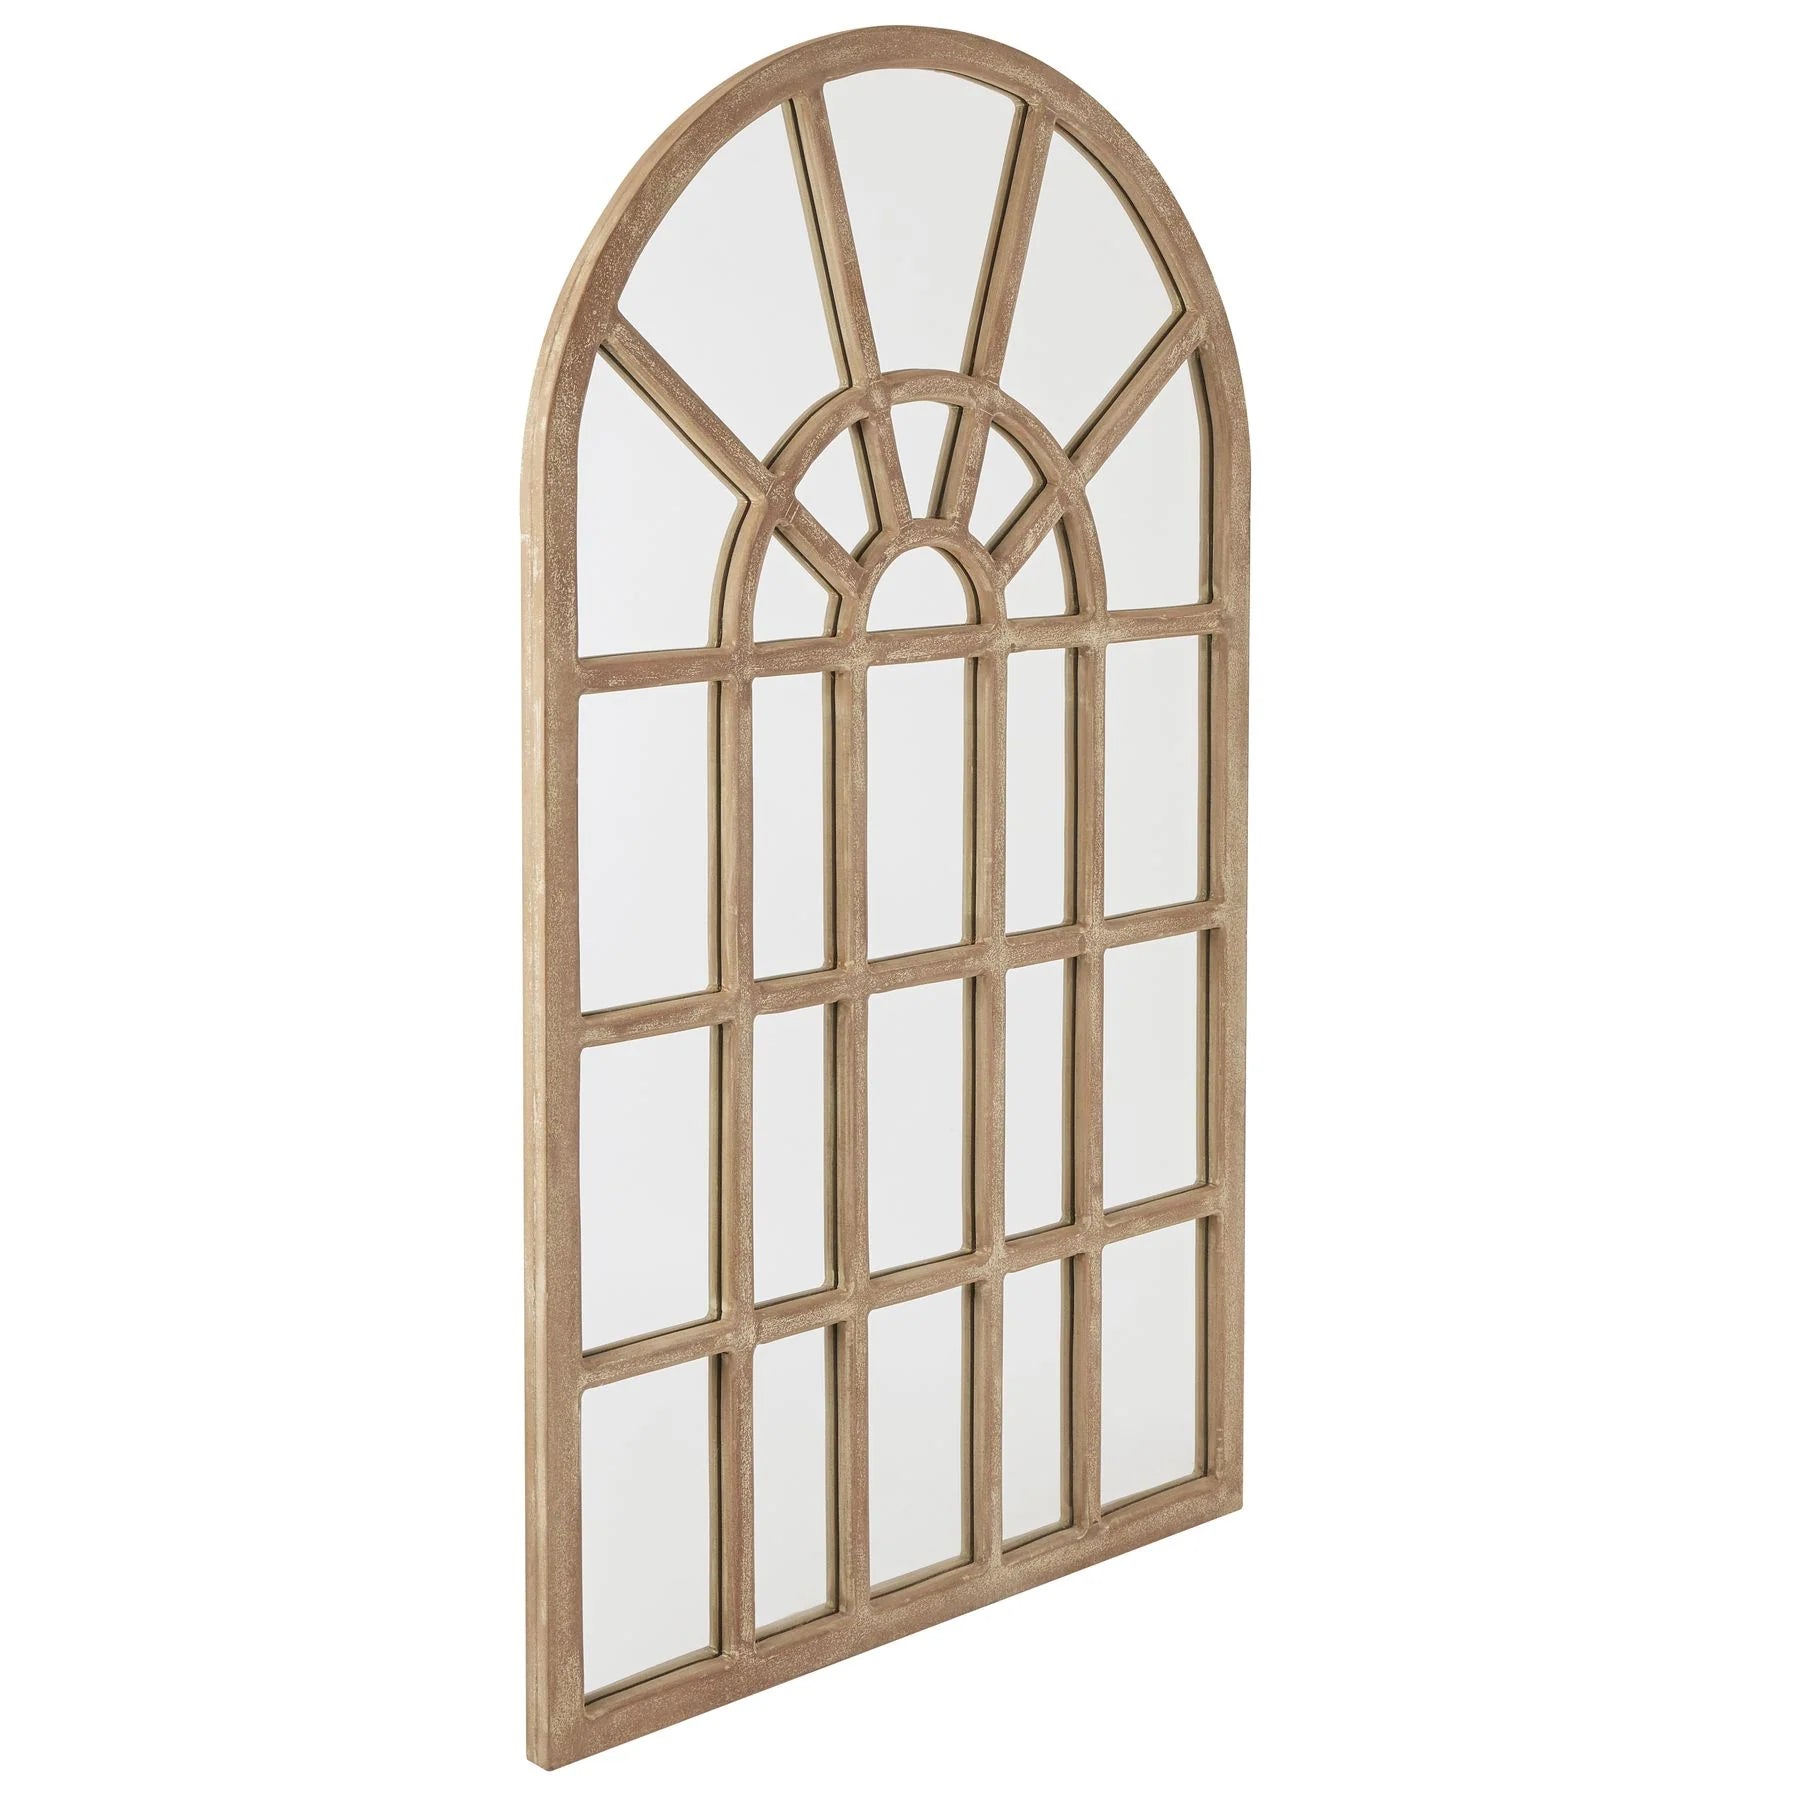 Copgrove Arched Wall Mirror